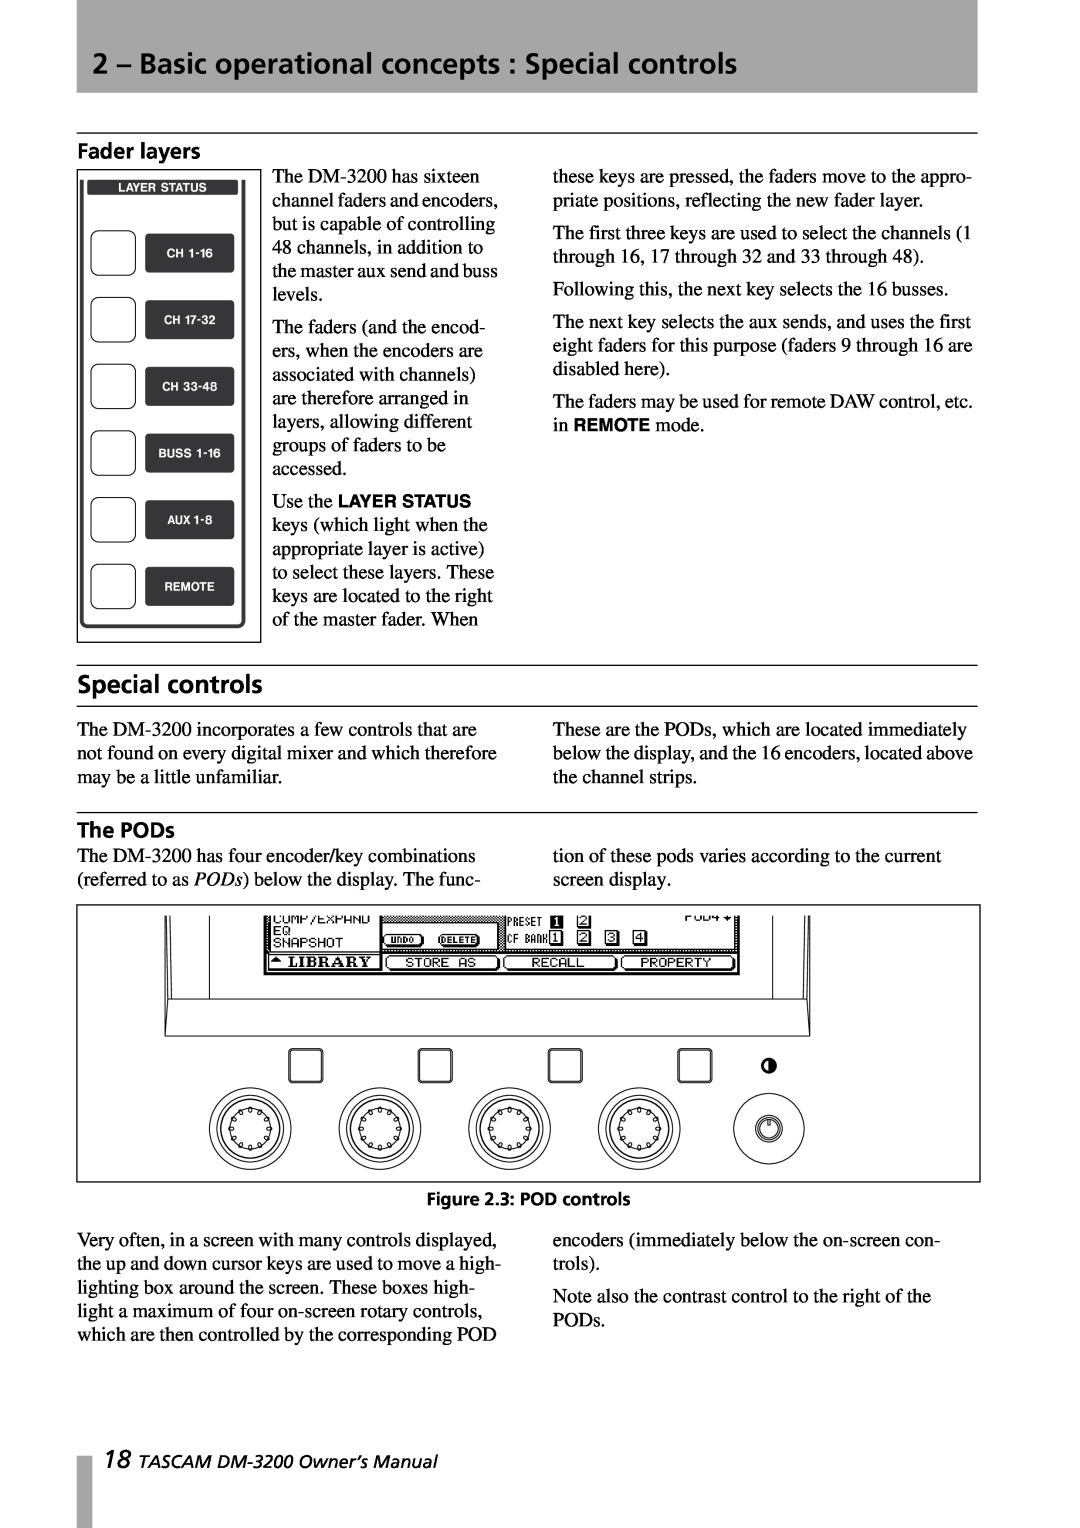 Tascam DM-3200 owner manual 2 – Basic operational concepts : Special controls, Fader layers, The PODs 